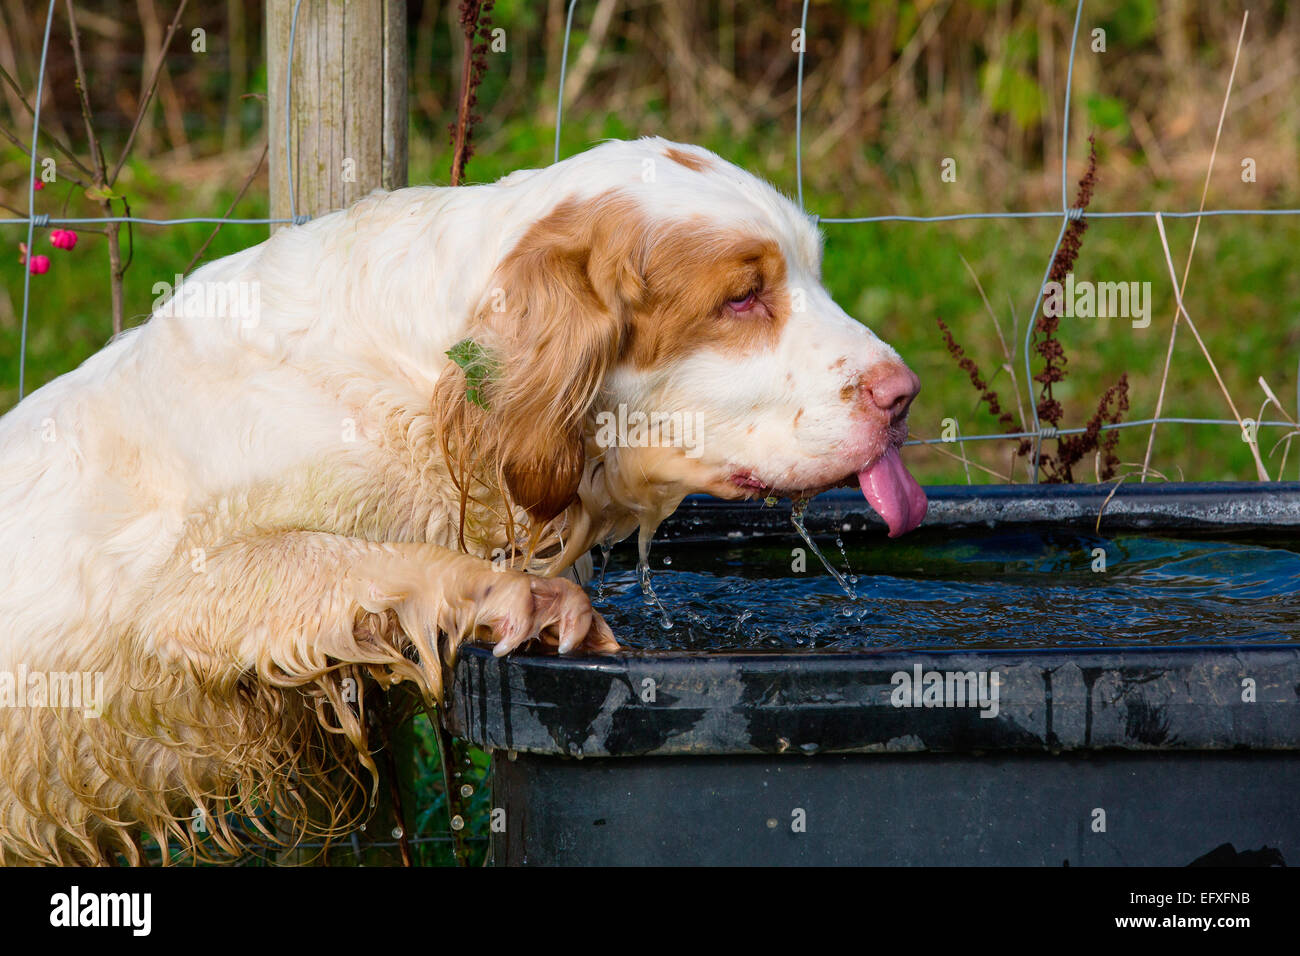 Clumber spaniel puppy on hind legs drinking from water trough Stock Photo